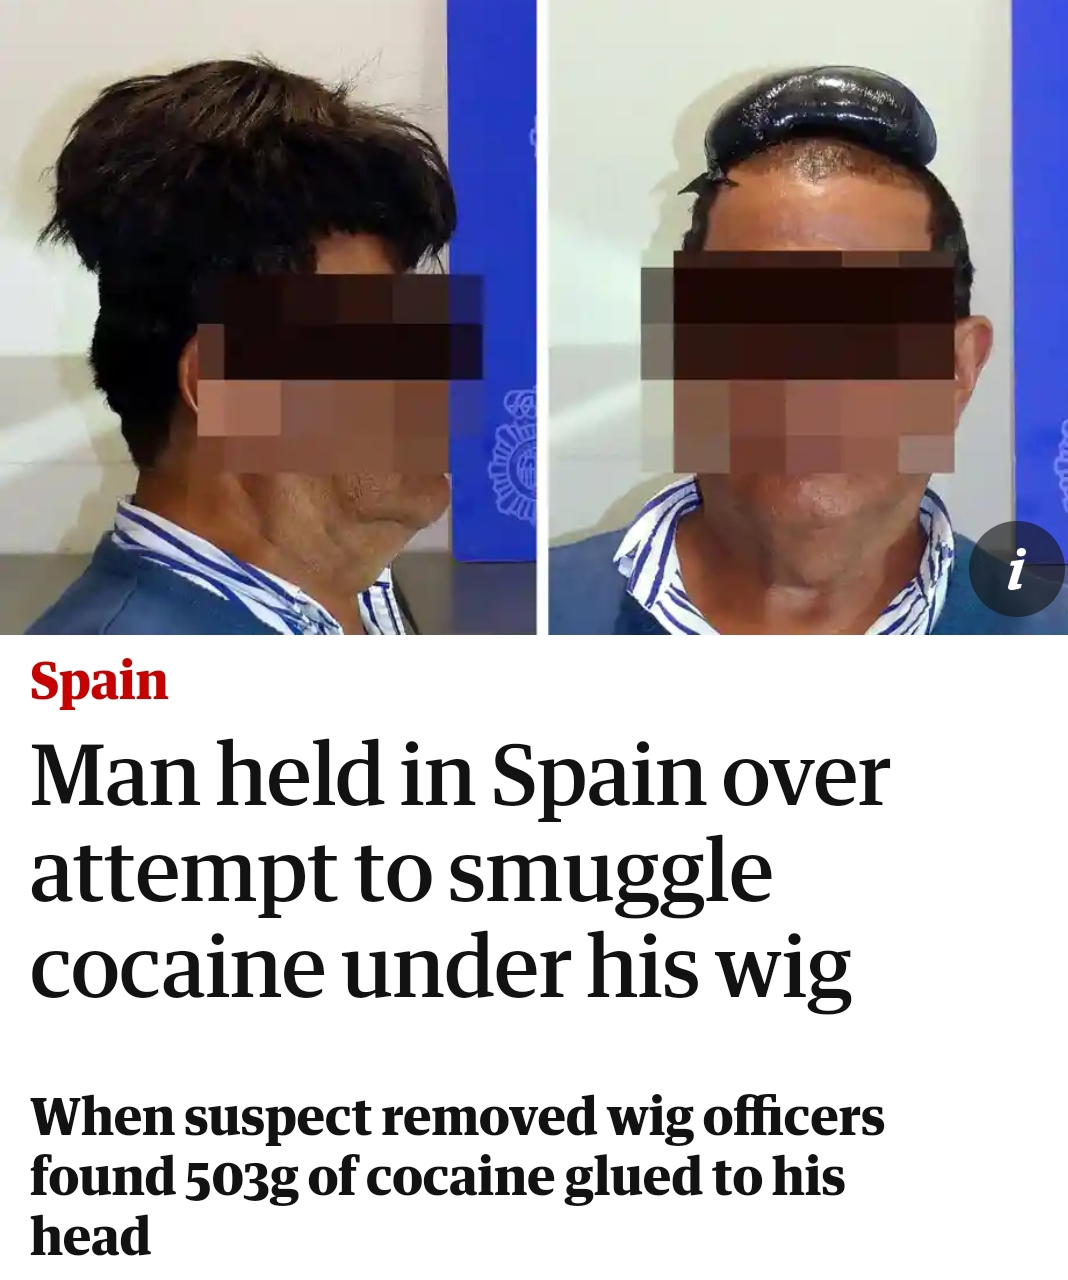 cocaine wig - Spain Man held in Spain over attempt to smuggle cocaine under his wig When suspect removed wig officers found 503g of cocaine glued to his head